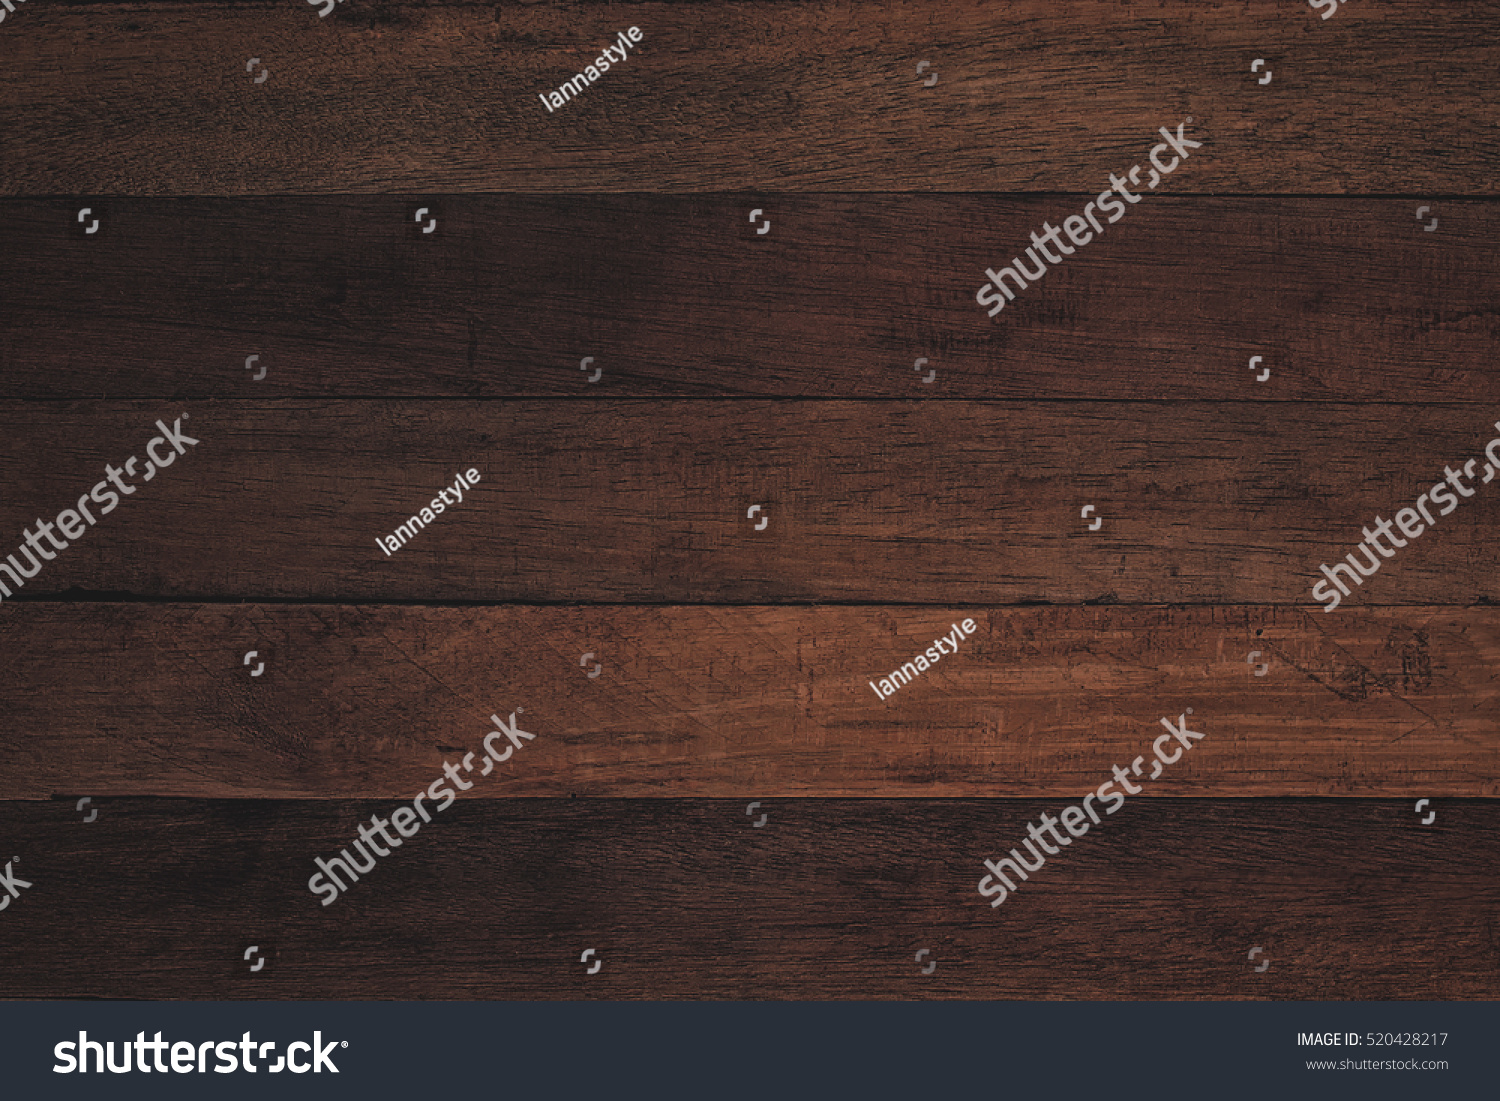 Edit Images Free Online - Wooden wall | Shutterstock Editor